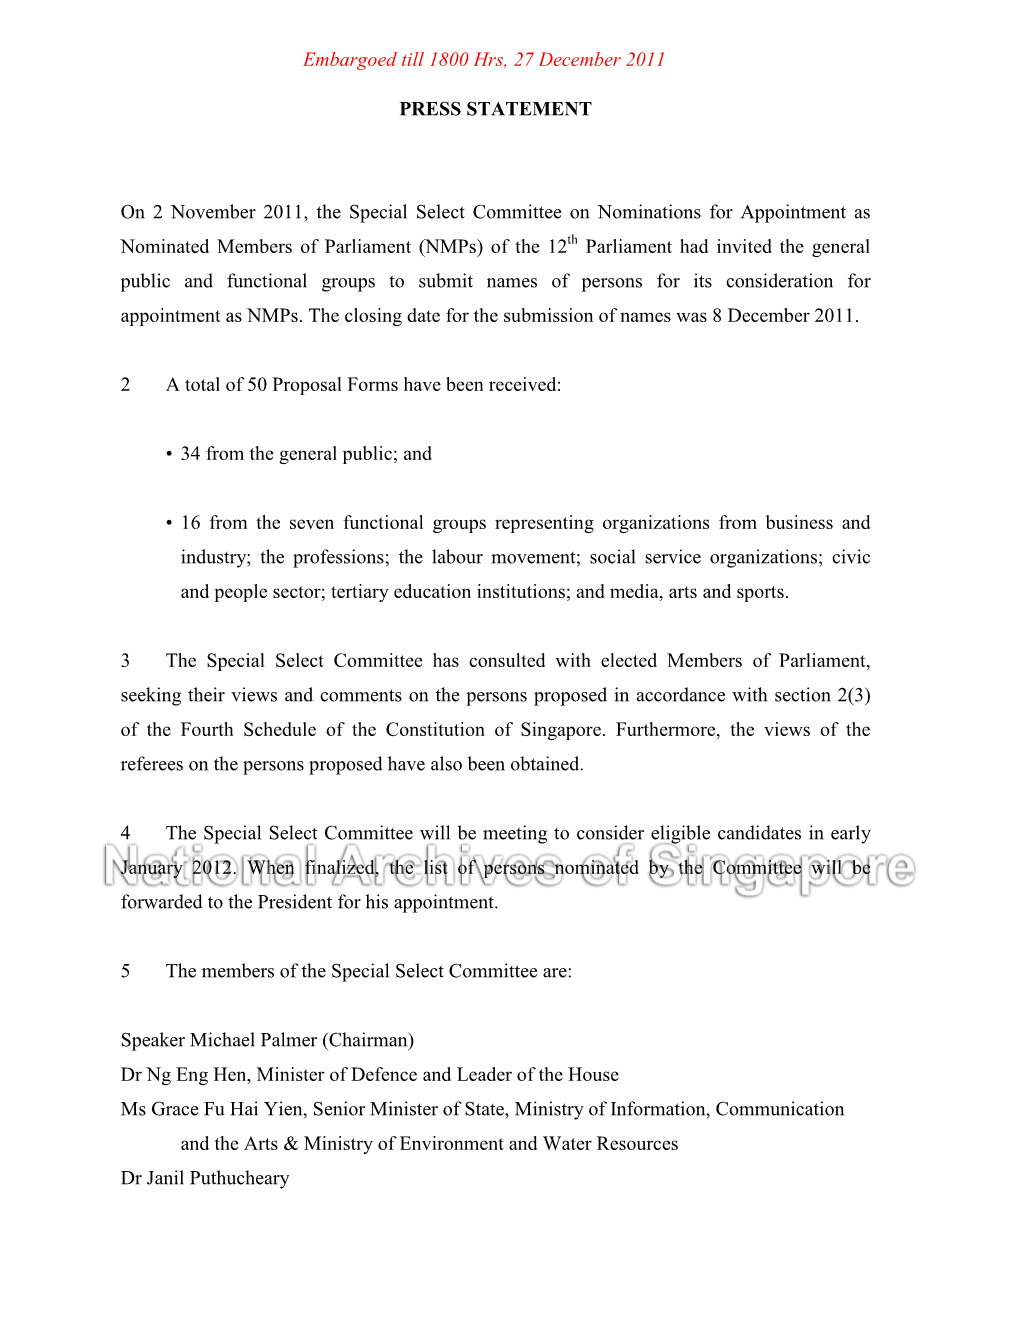 PRESS STATEMENT on 2 November 2011, the Special Select Committee